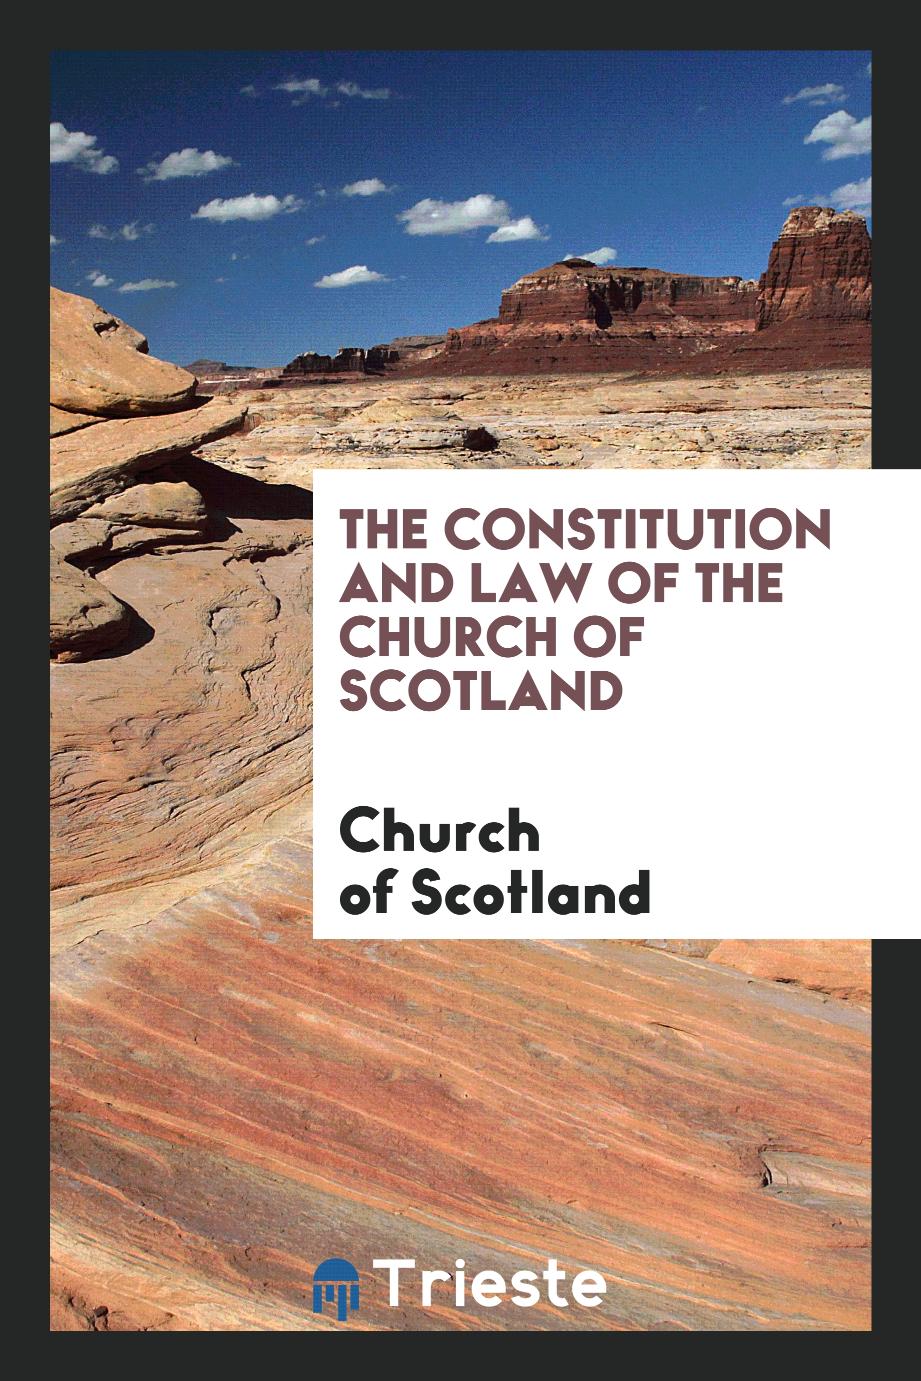 The Constitution and Law of the Church of Scotland